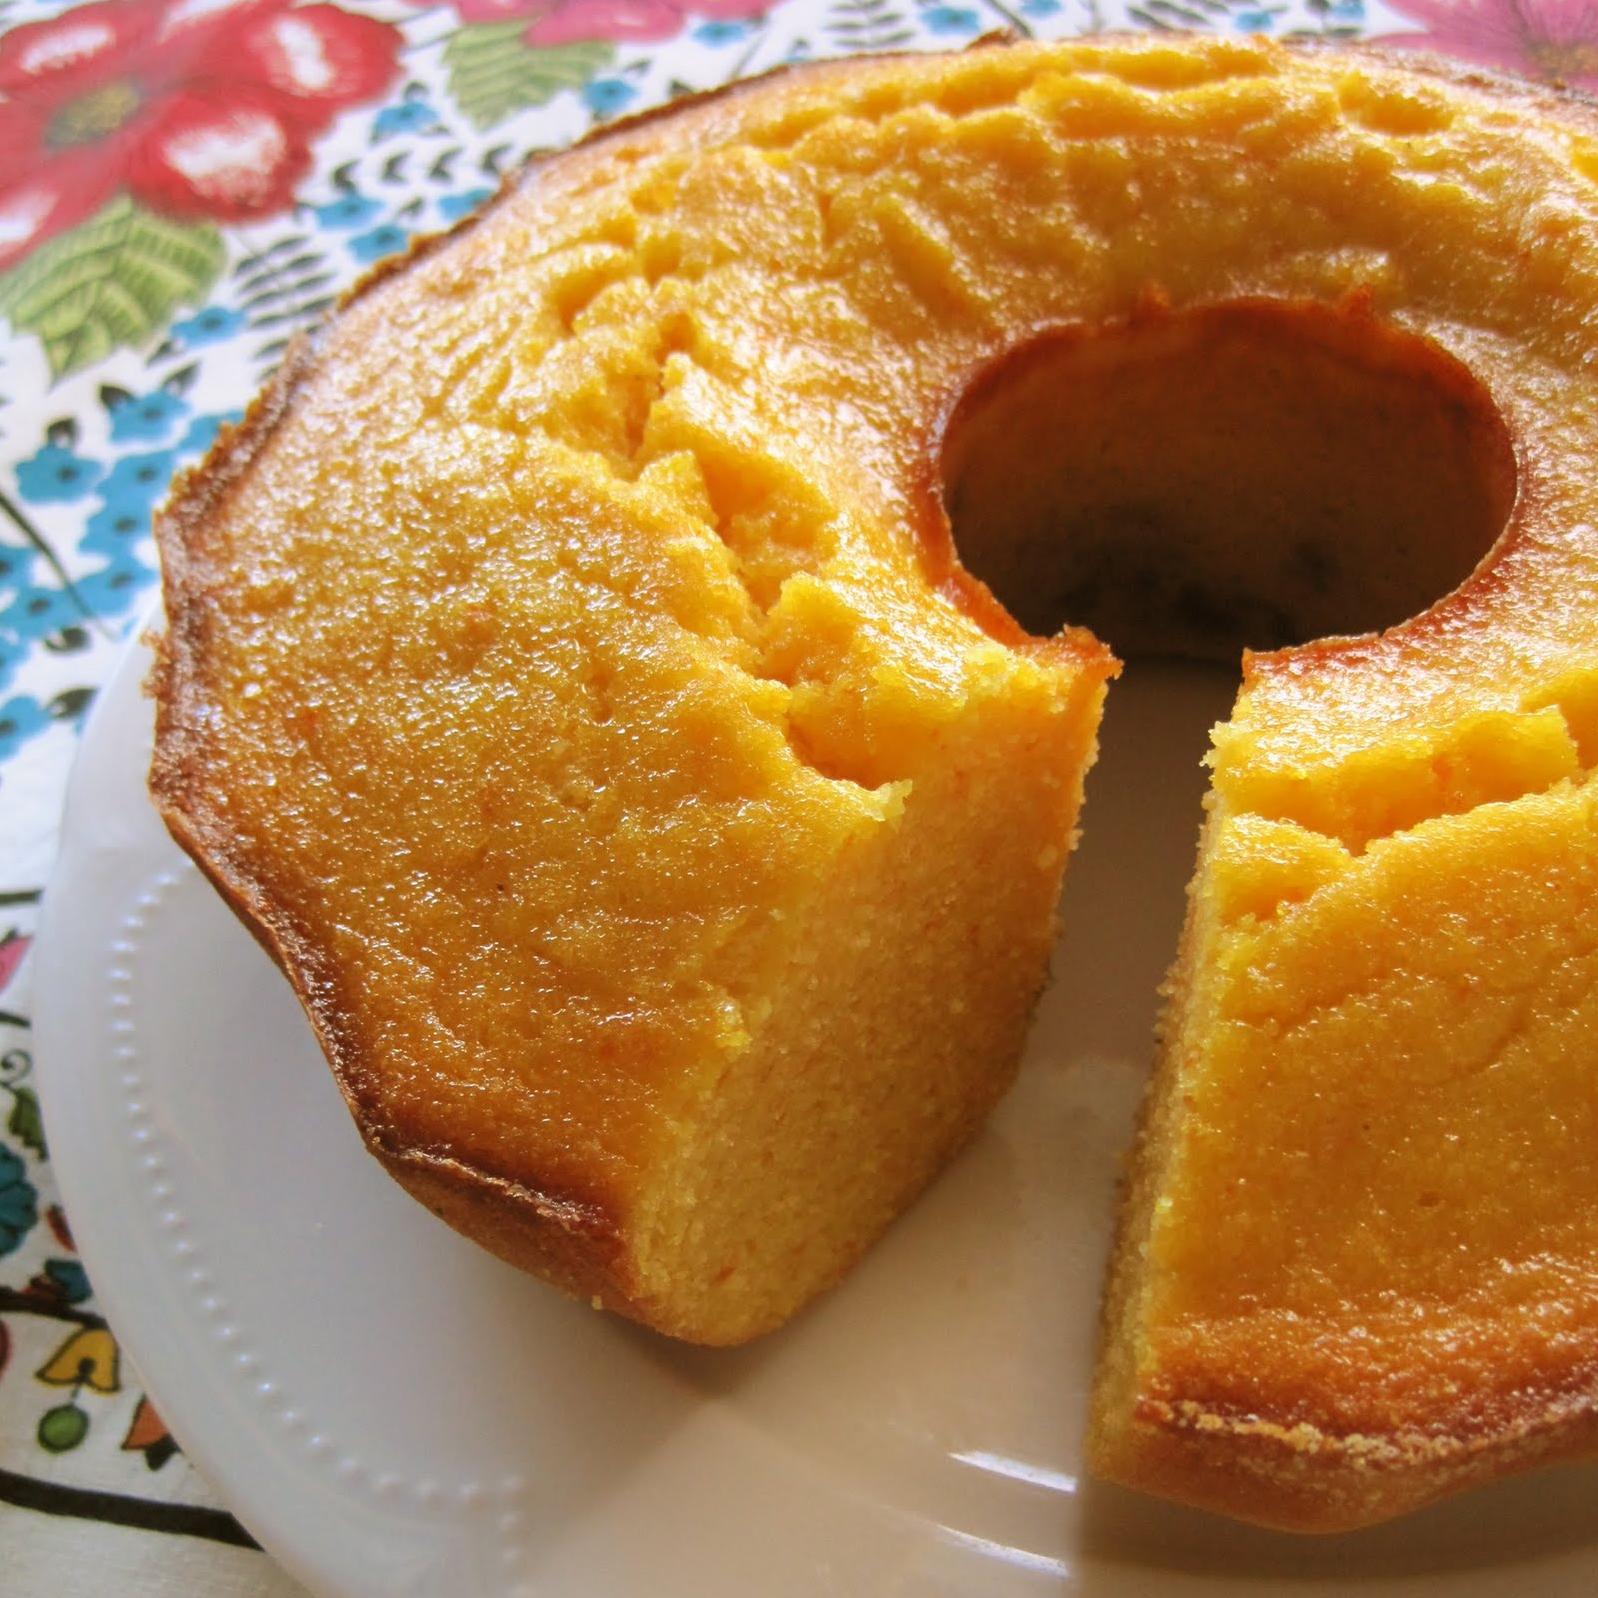  Start your day the gluten-free way with my scrumptious corn cake recipe!